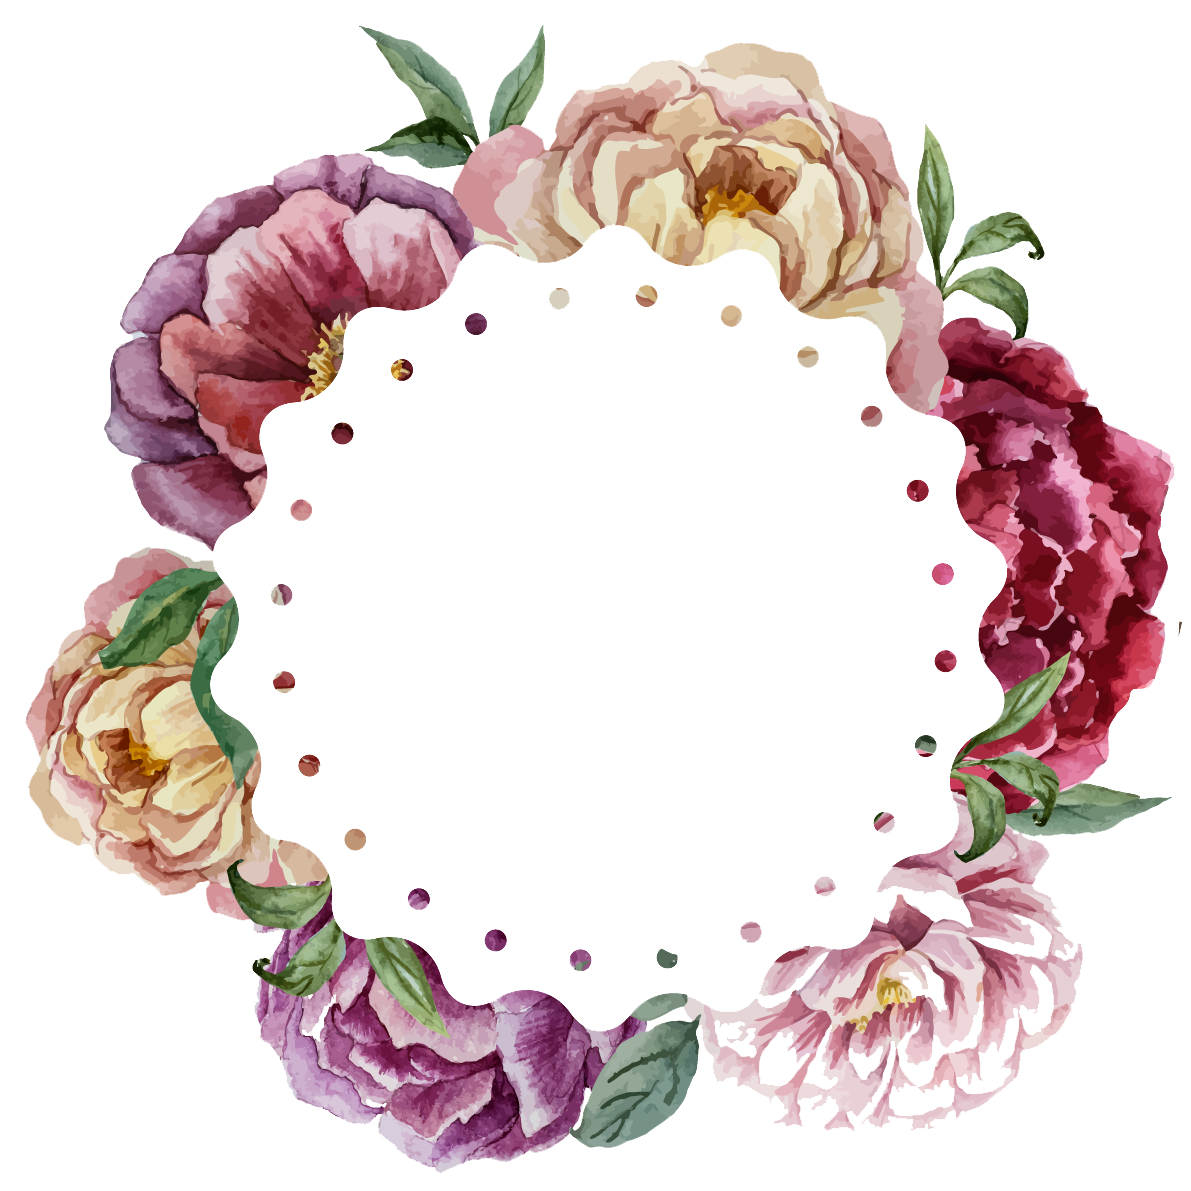 Watercolor Painting Flower Wreath Wedding Colored Ring Flowers Png Download 1191 1191 Free Transparent Watercolor Painting Png Download Clip Art Library